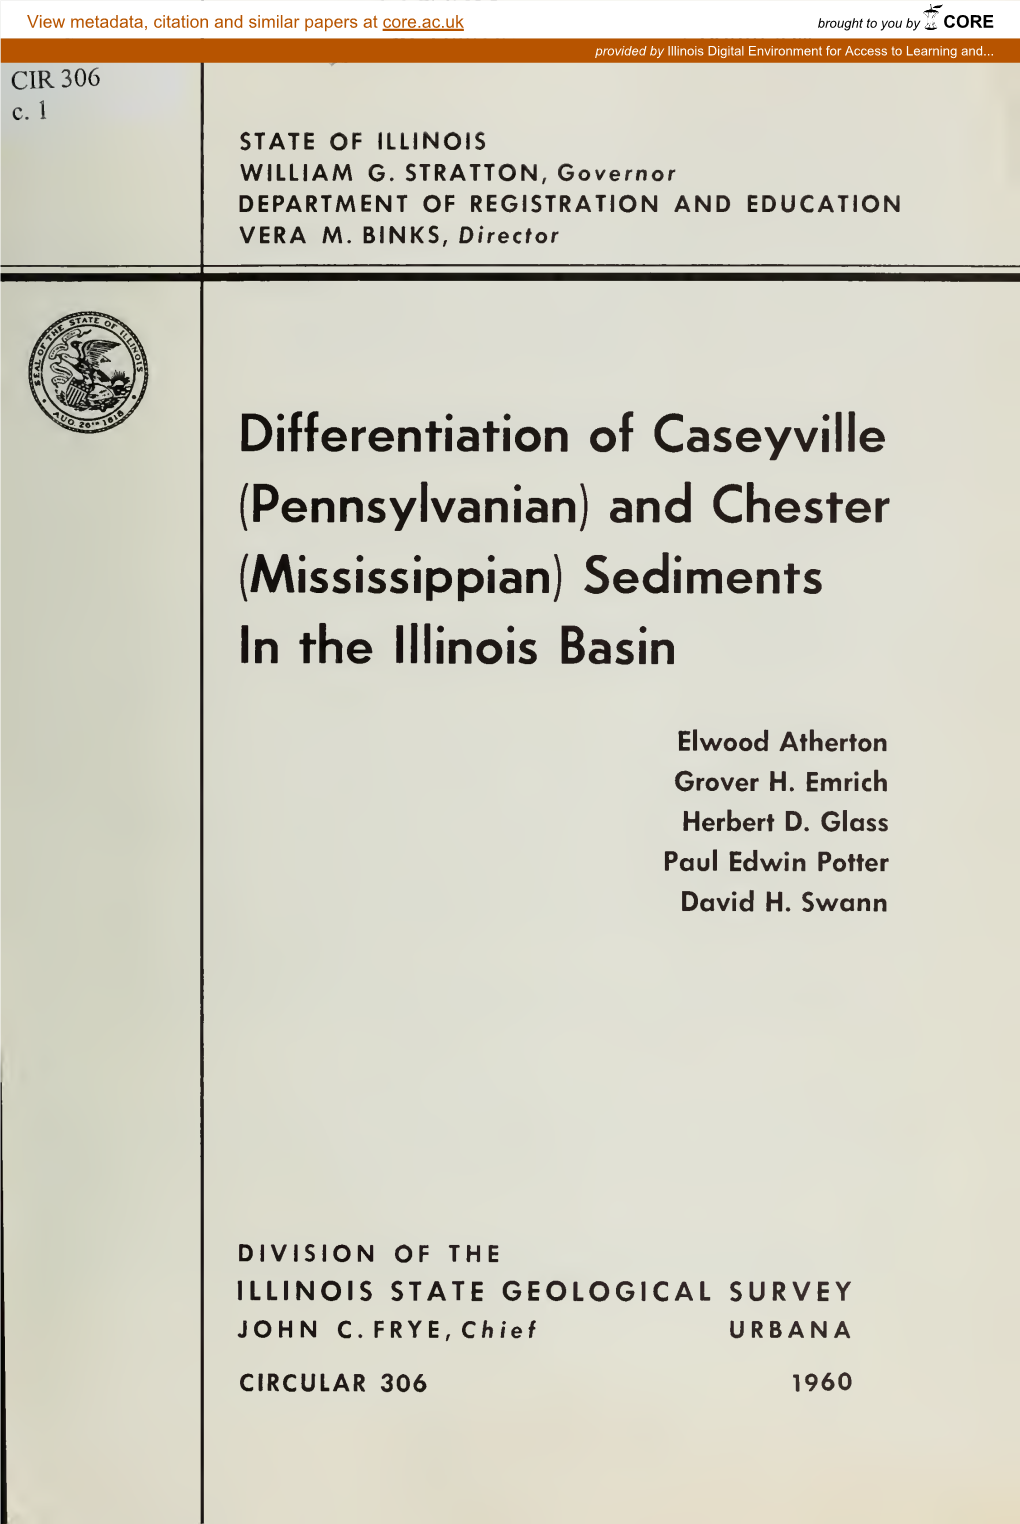 Differentiation of Caseyville (Pennsylvanian) and Chester (Mississippian) Sediments